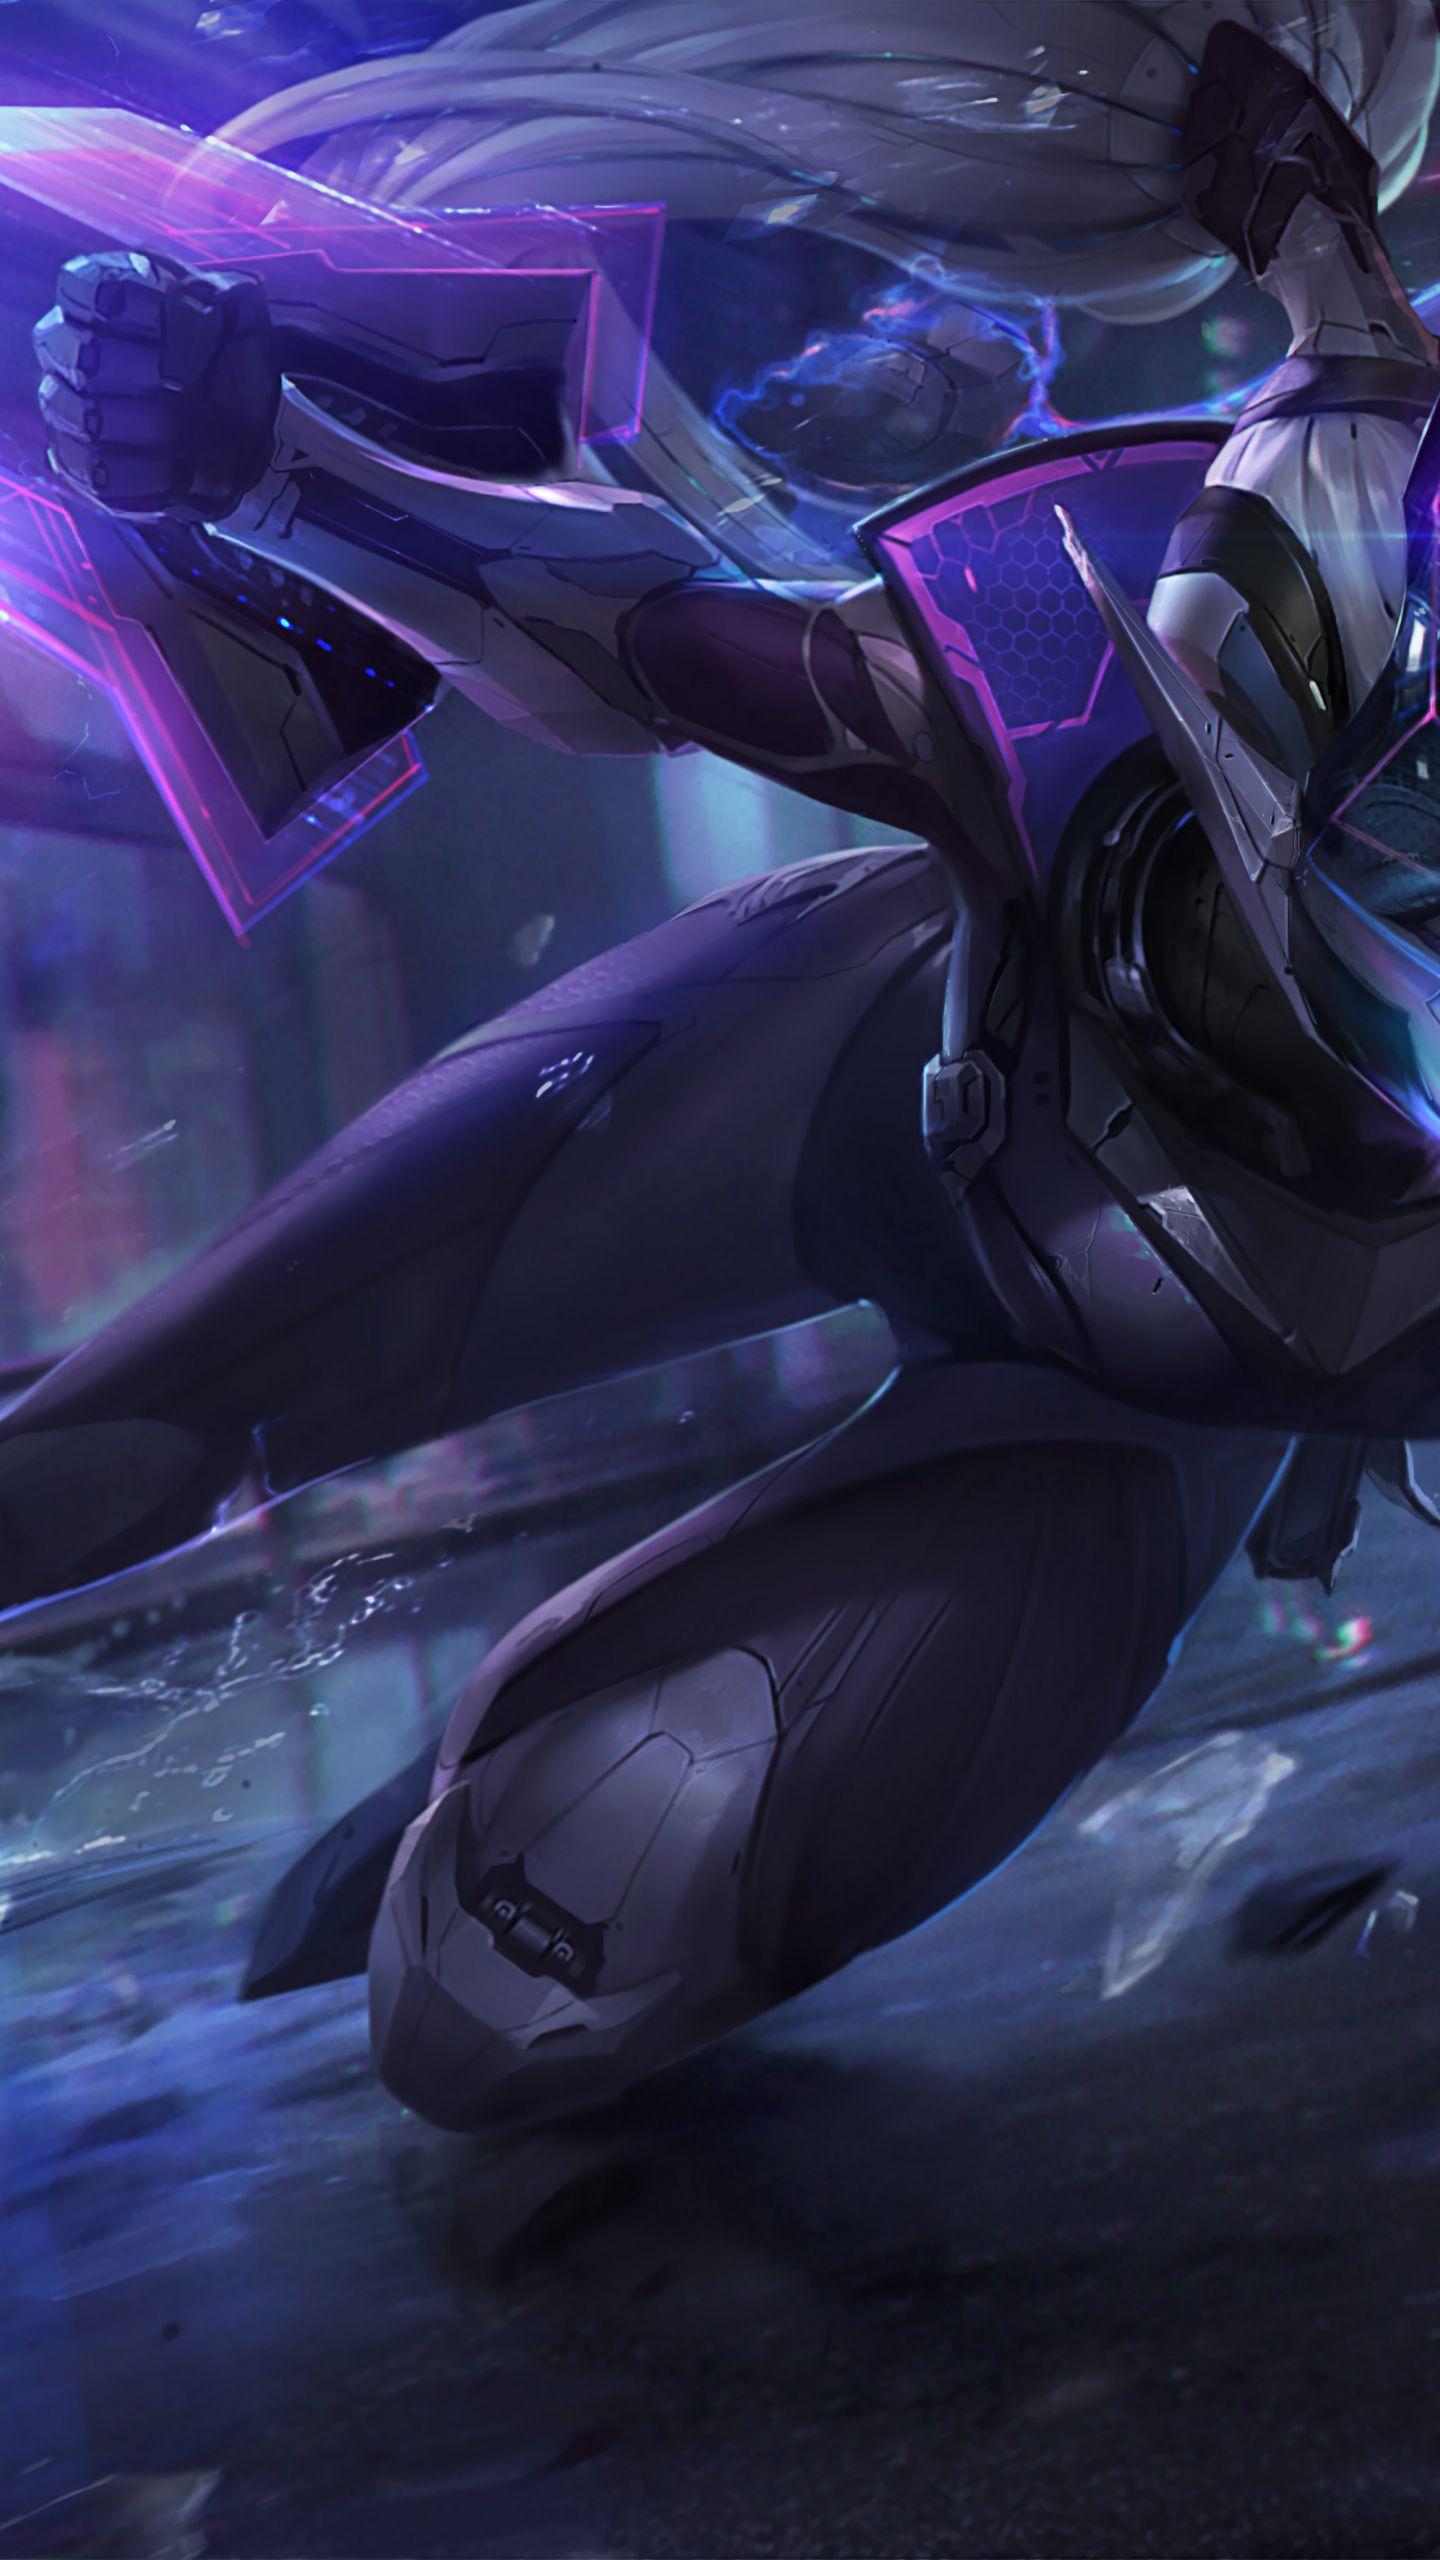 Project Vayne Wallpapers - Top Free Project Vayne Backgrounds ...